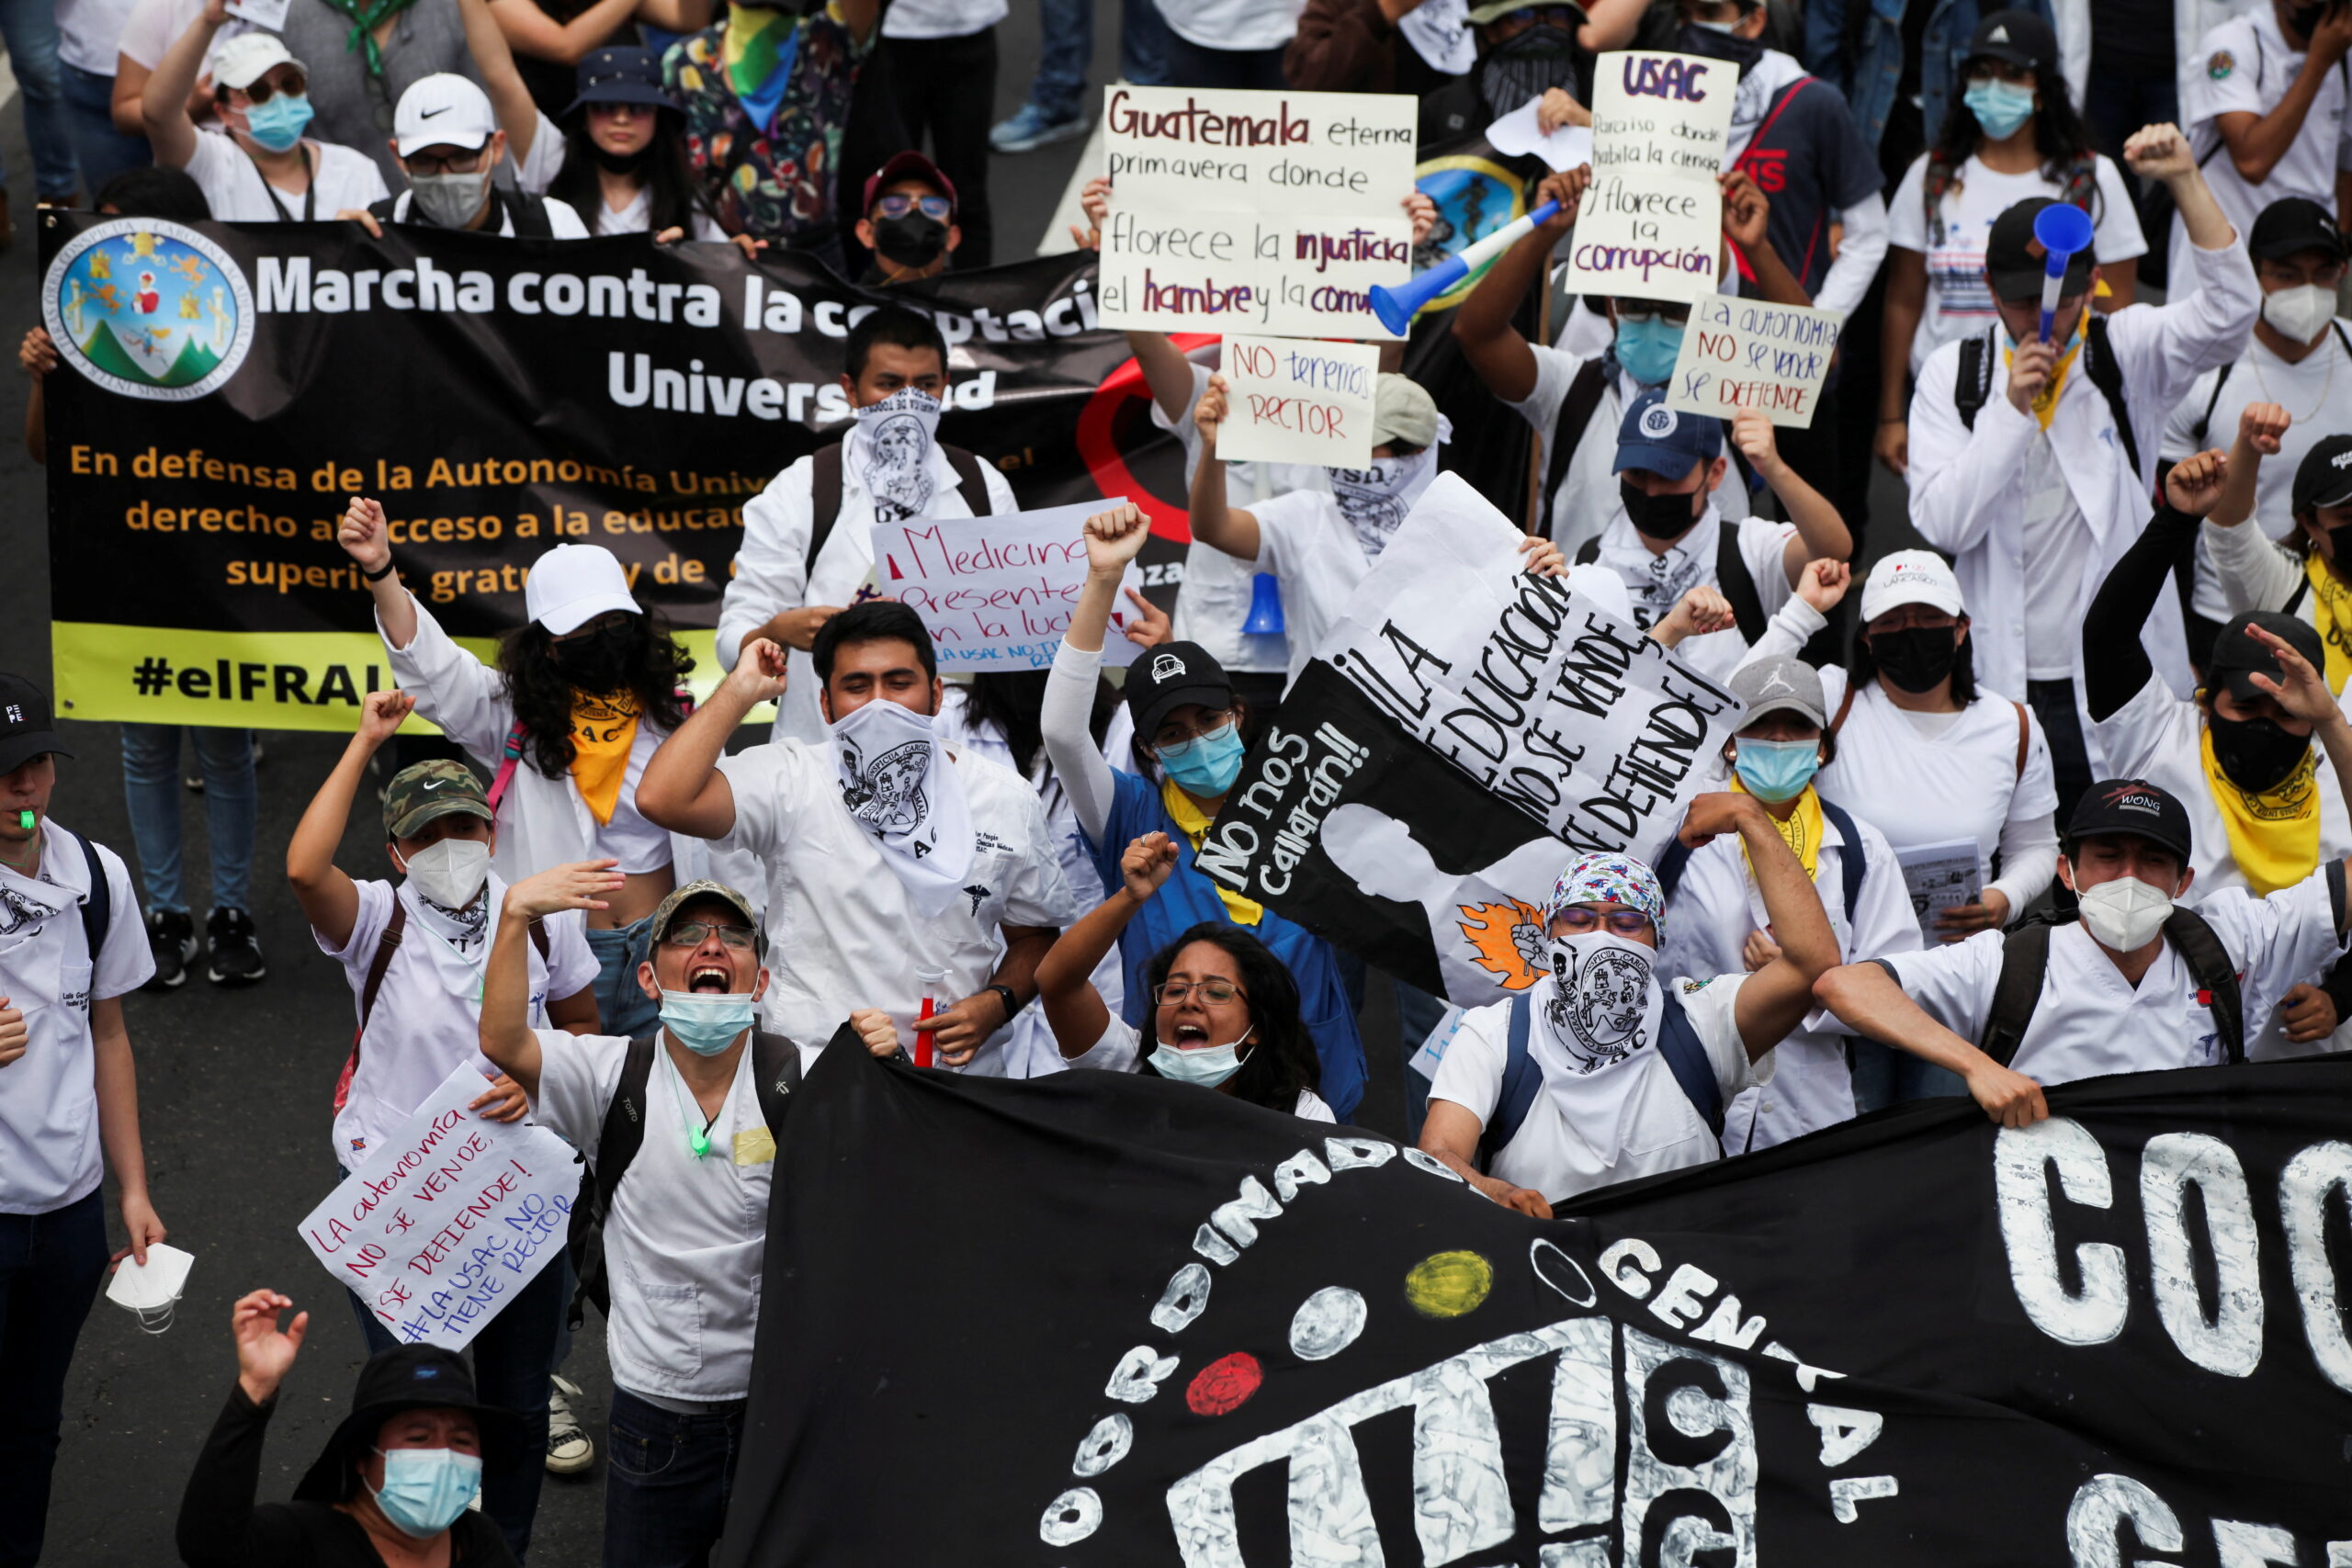 Demonstrators raise their hands as they march during a protest against corruption in Guatemala